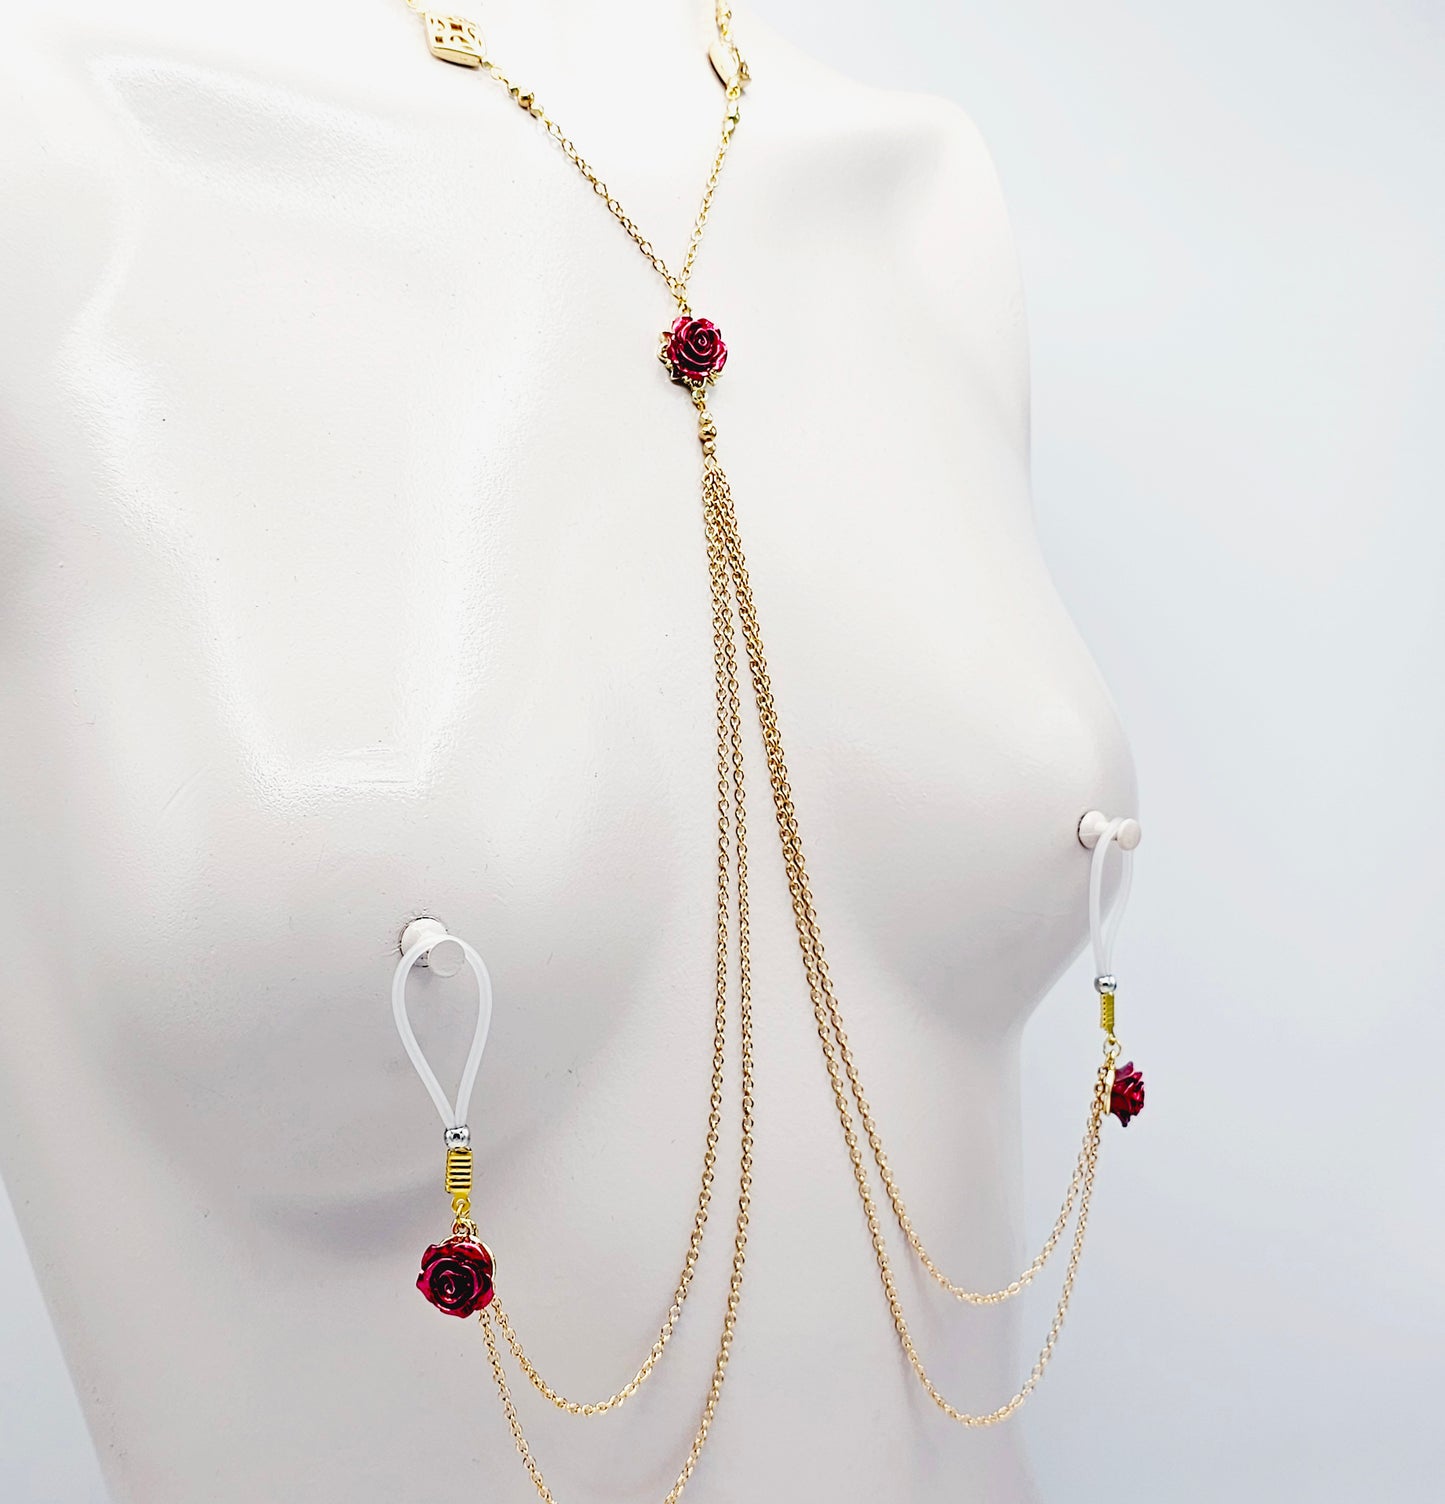 Elegant Gold Necklace to Nipple with Red Roses and Your Choice of Nipple Attachment, Non Piercing. Nooses or Nipple Clamps.